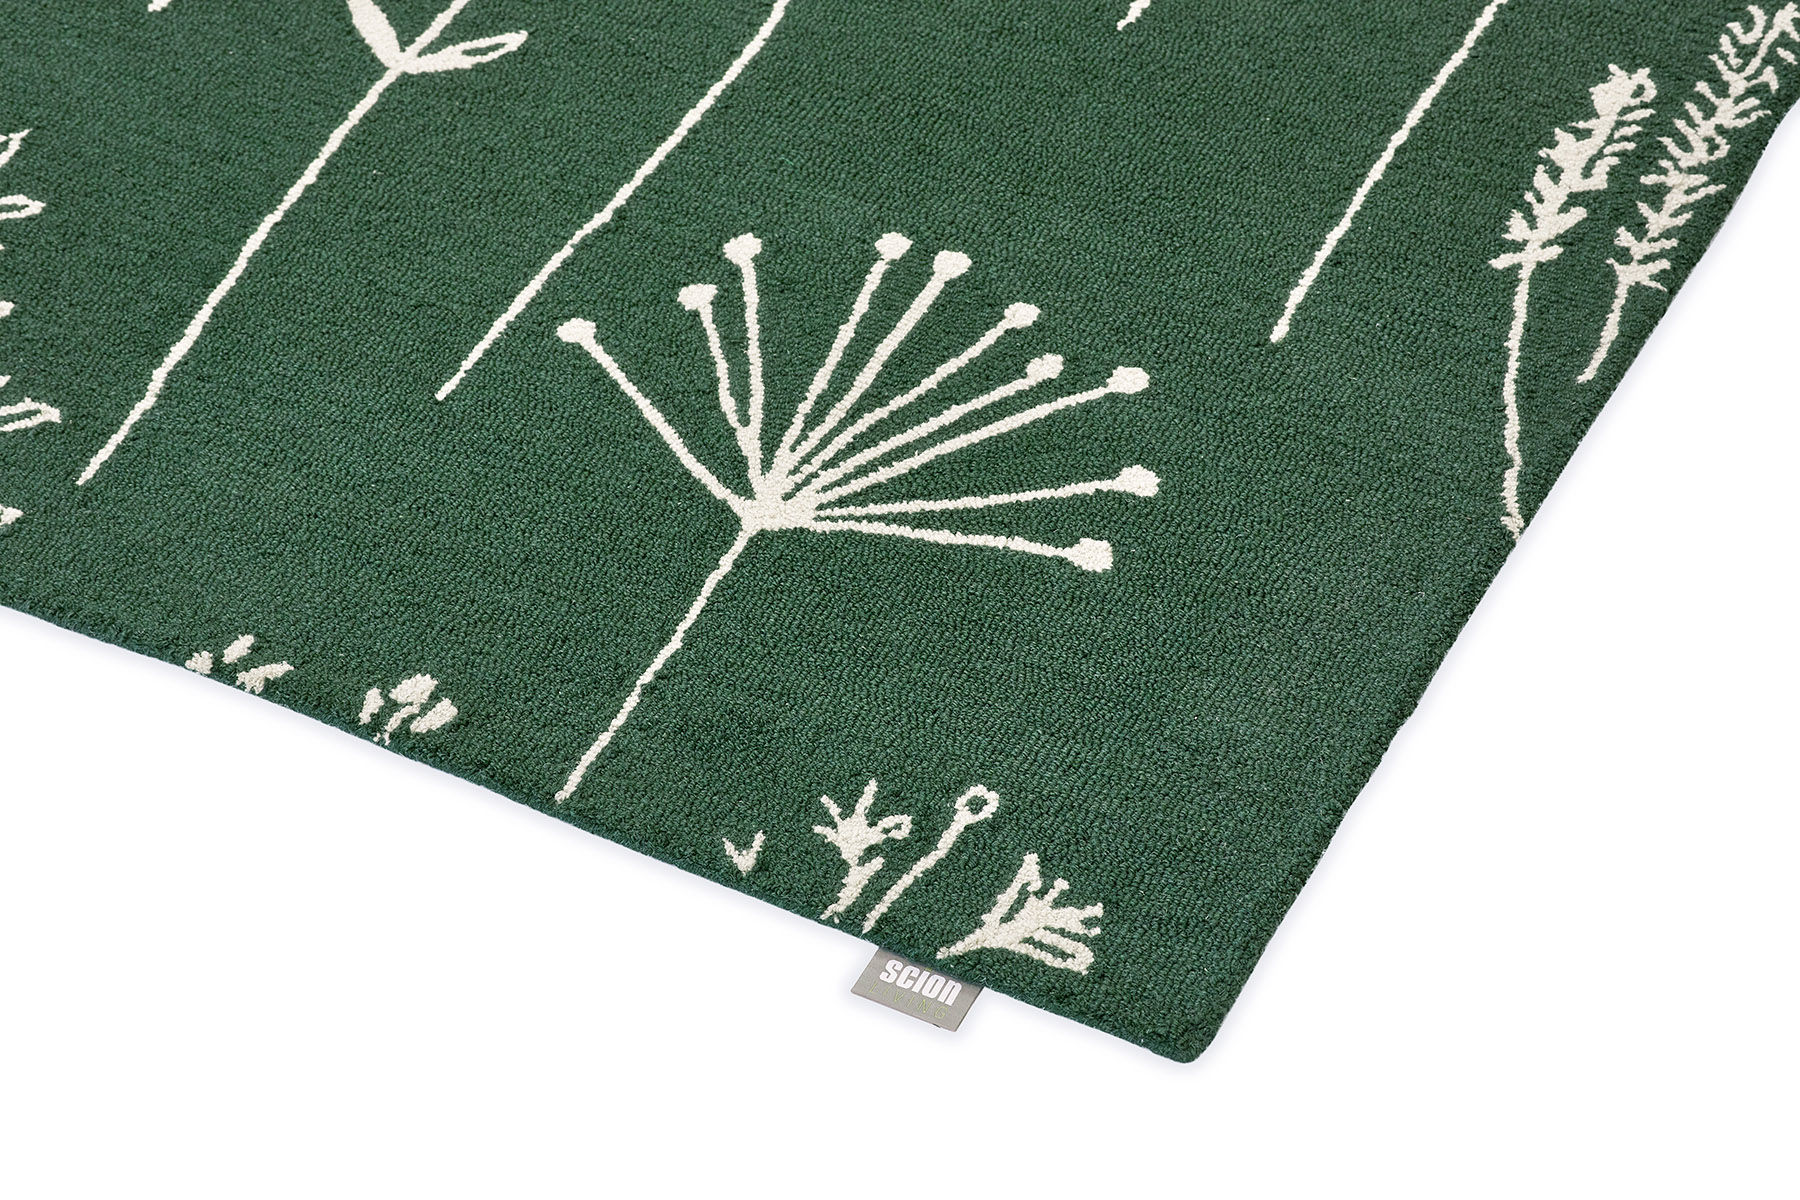 Stipa-Forest 126407 Rug ☞ Size: 120 x 180 cm